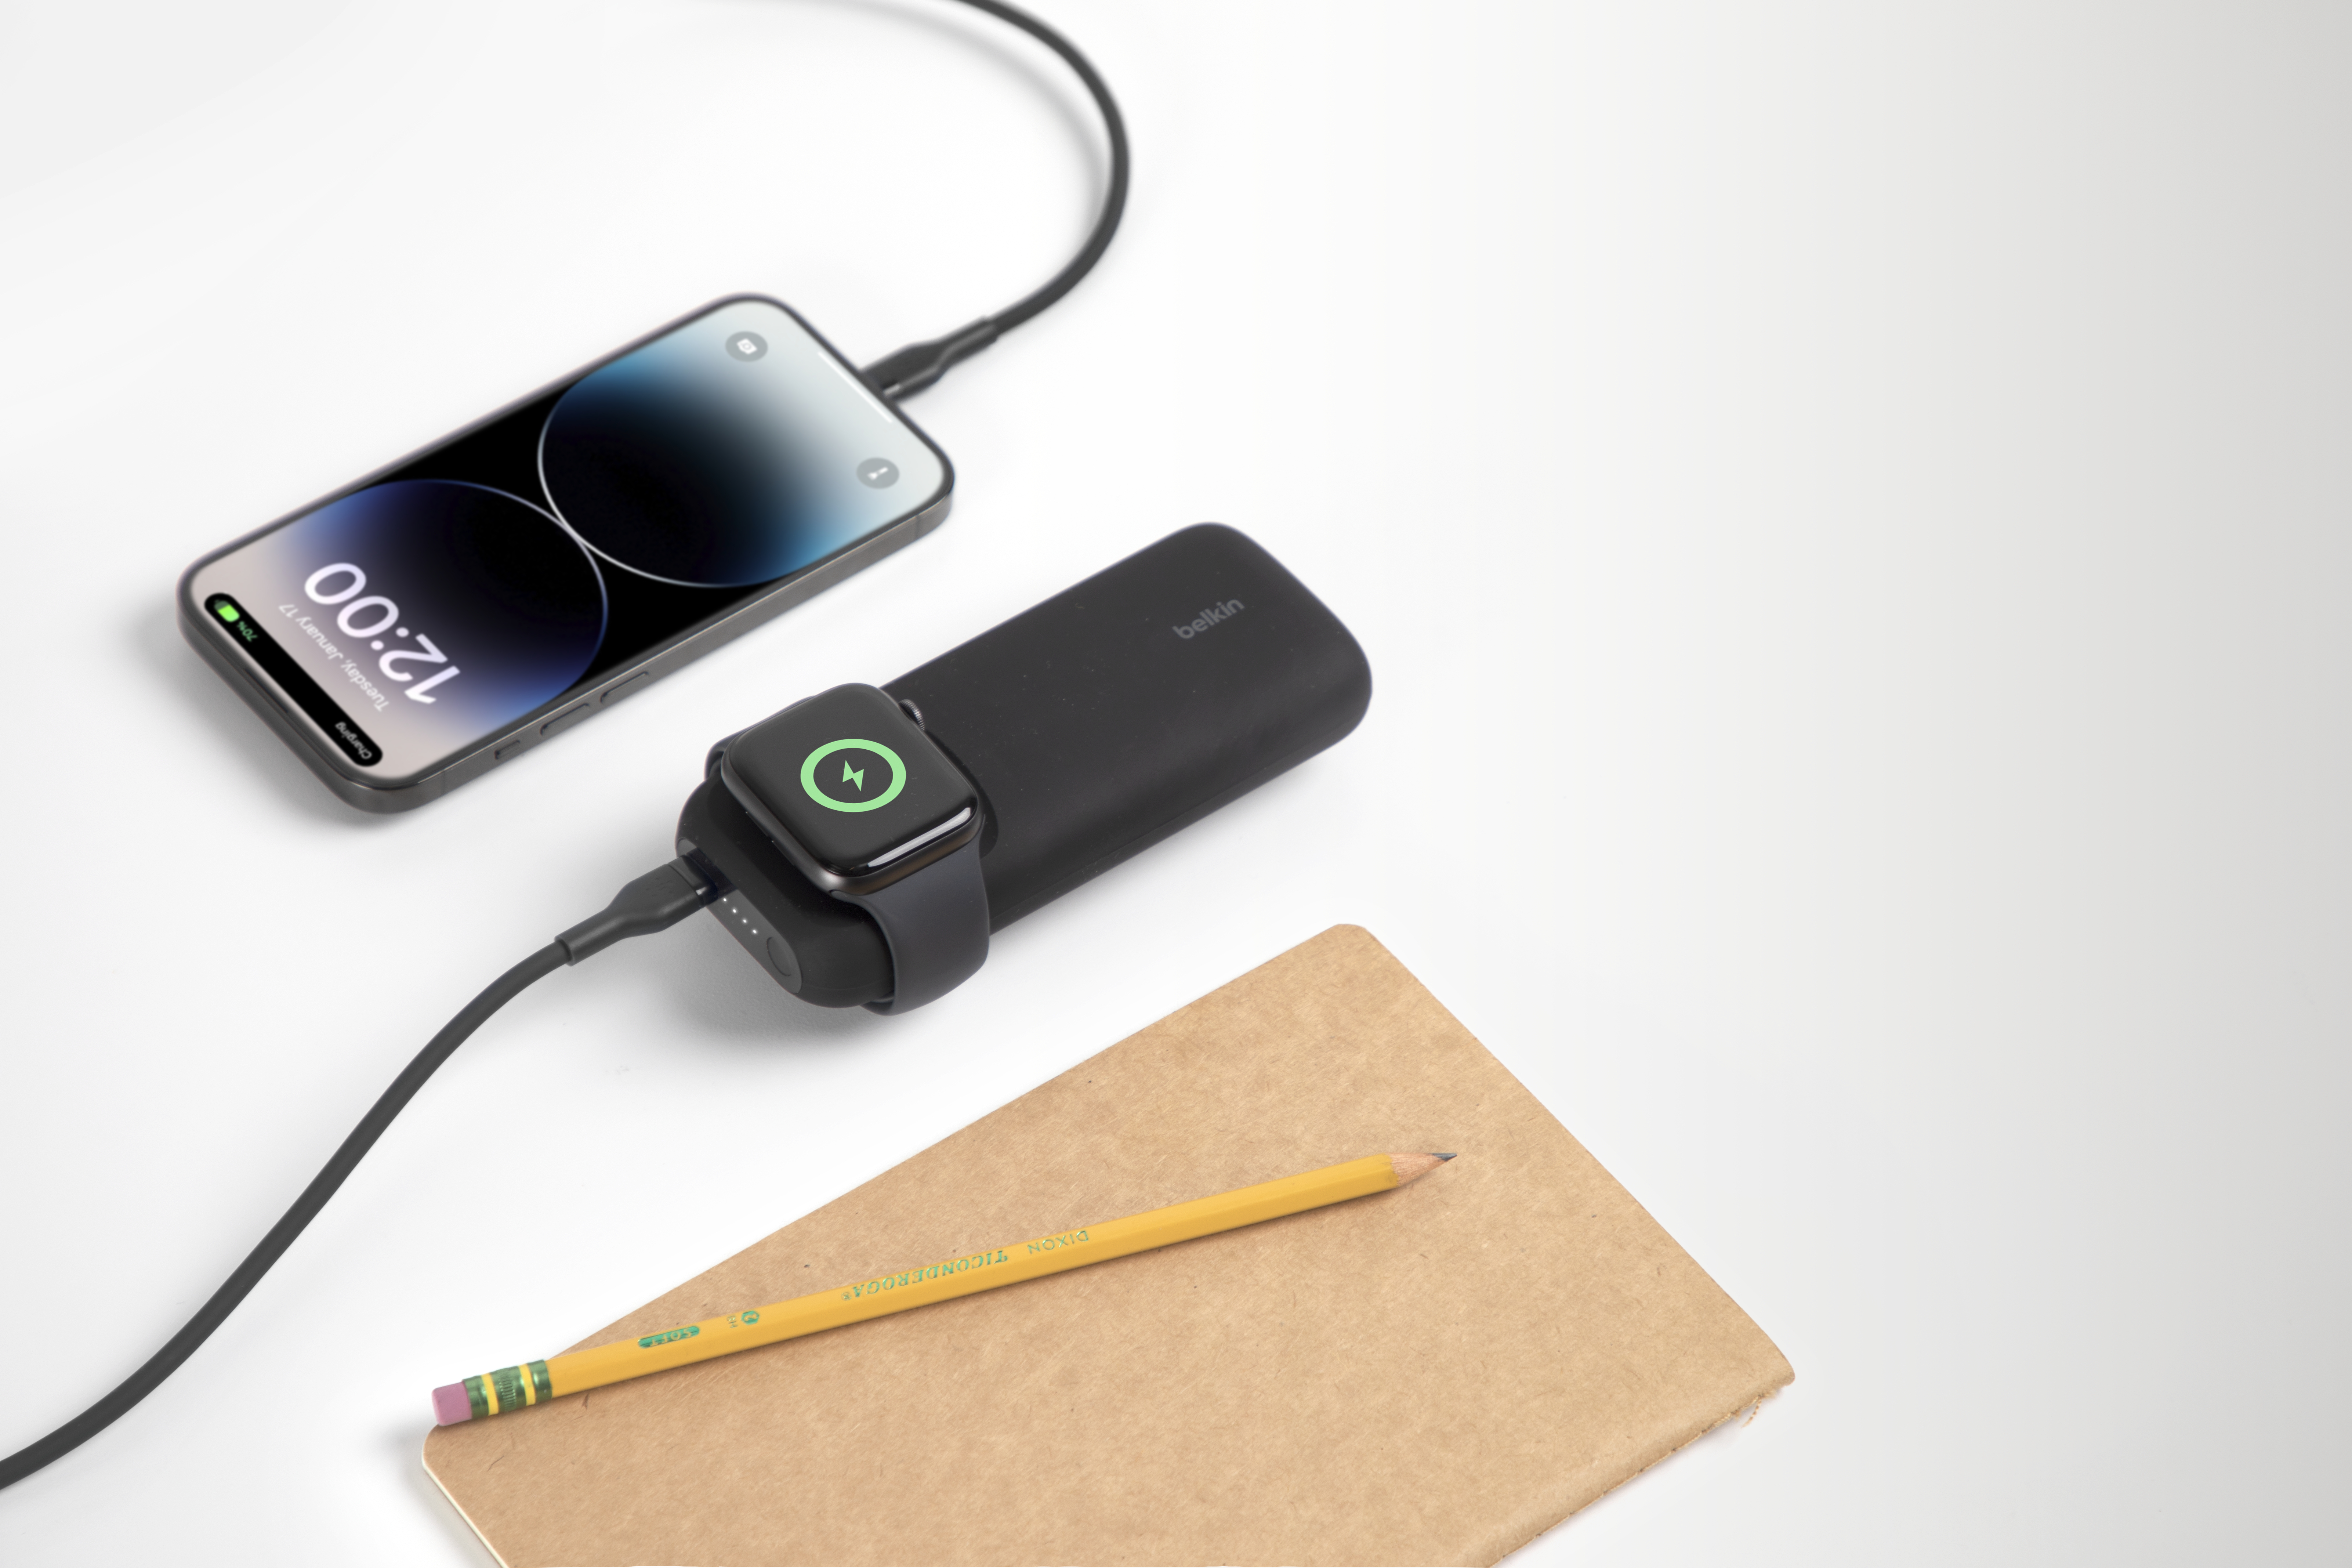 CORRECTING and REPLACING Belkin Introduces the Ultimate Power Bank